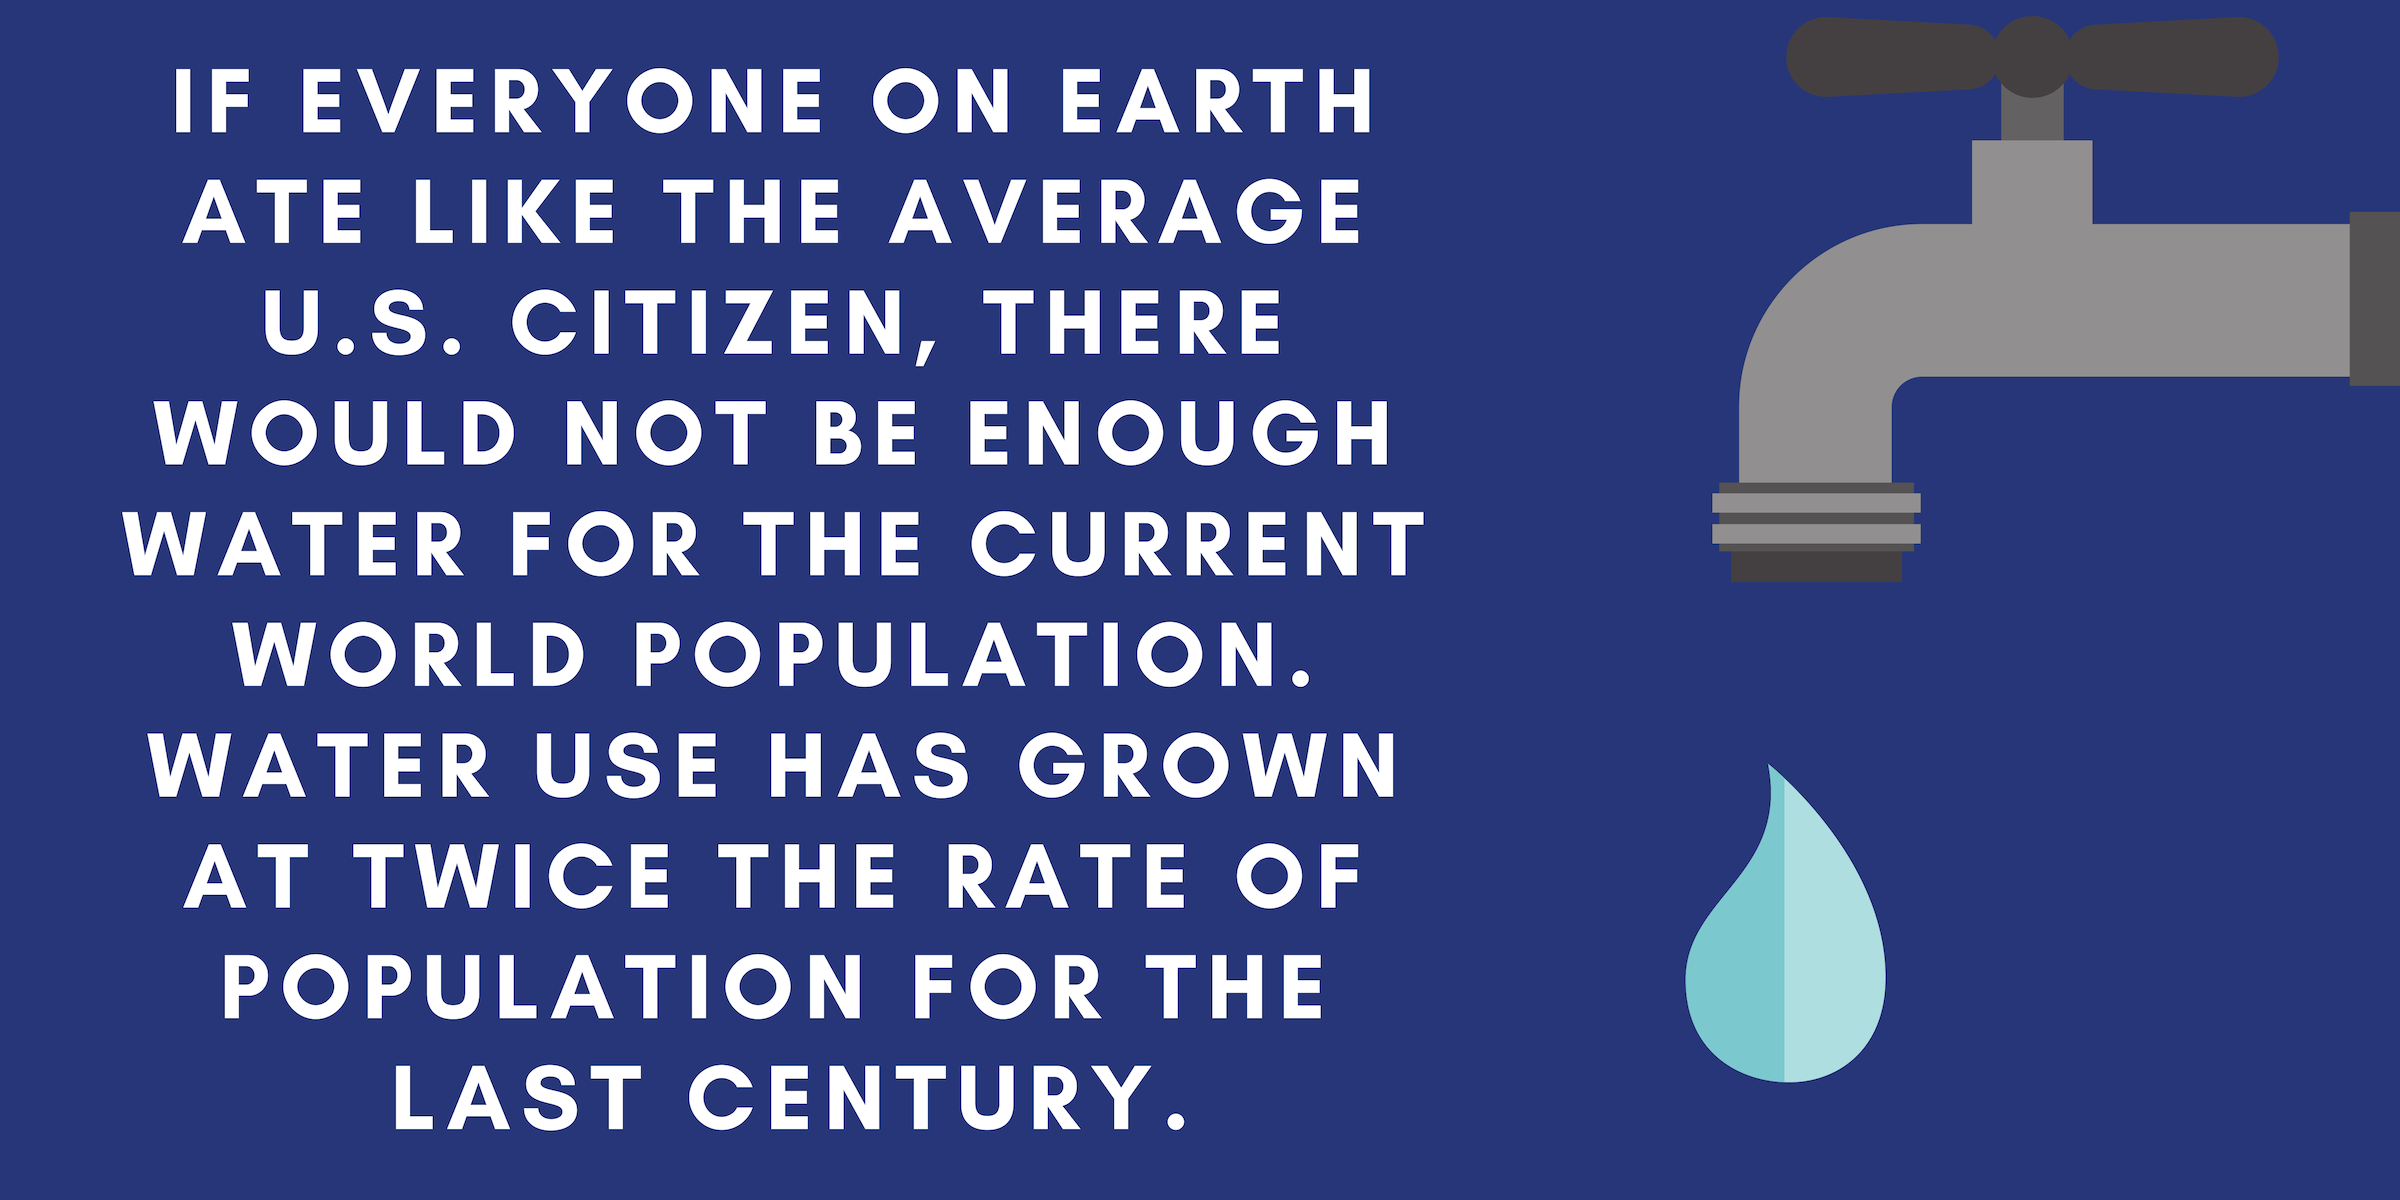 If everyone on Earth ate like the average U.S. Citizen, there would not be enough water for the current population. Water use has grown at twice the rate of population for the last century.